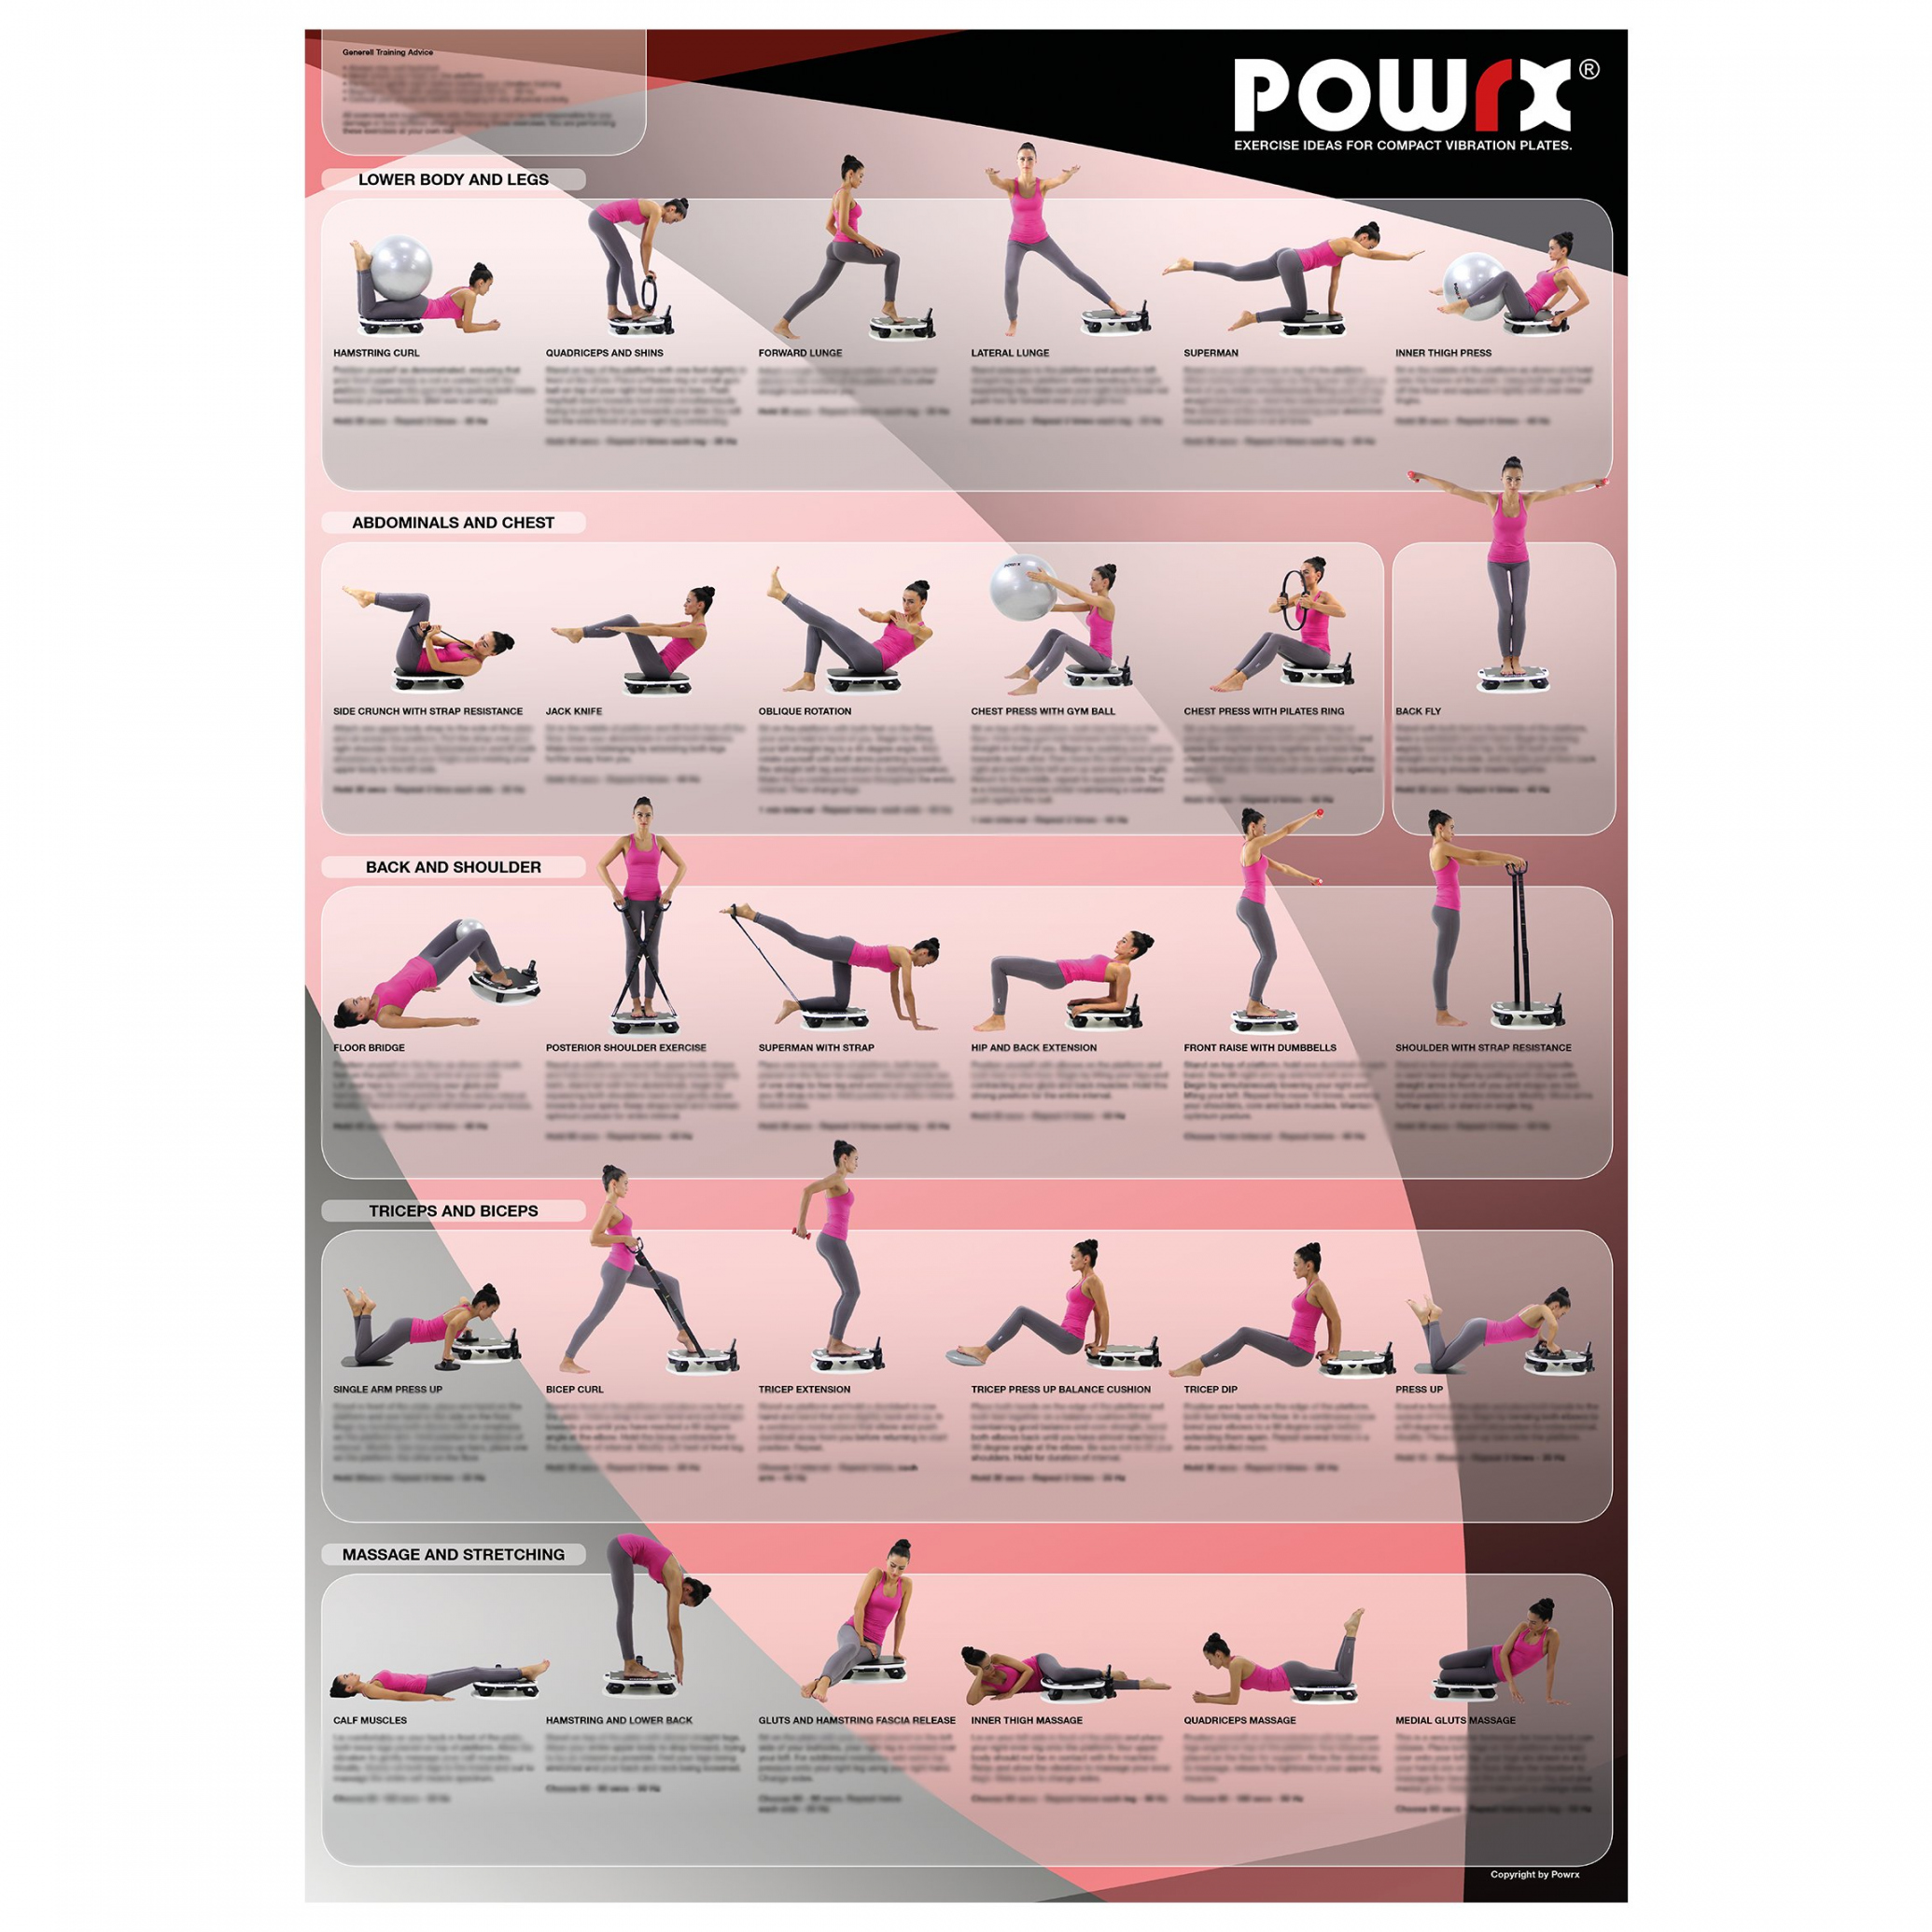 Whole Body Vibration Training Chart for Portable Vibration Fitness Machines  Plus Free Personal Training Plan - FREE Printables - Printable Free Vibration Plate Exercise Chart